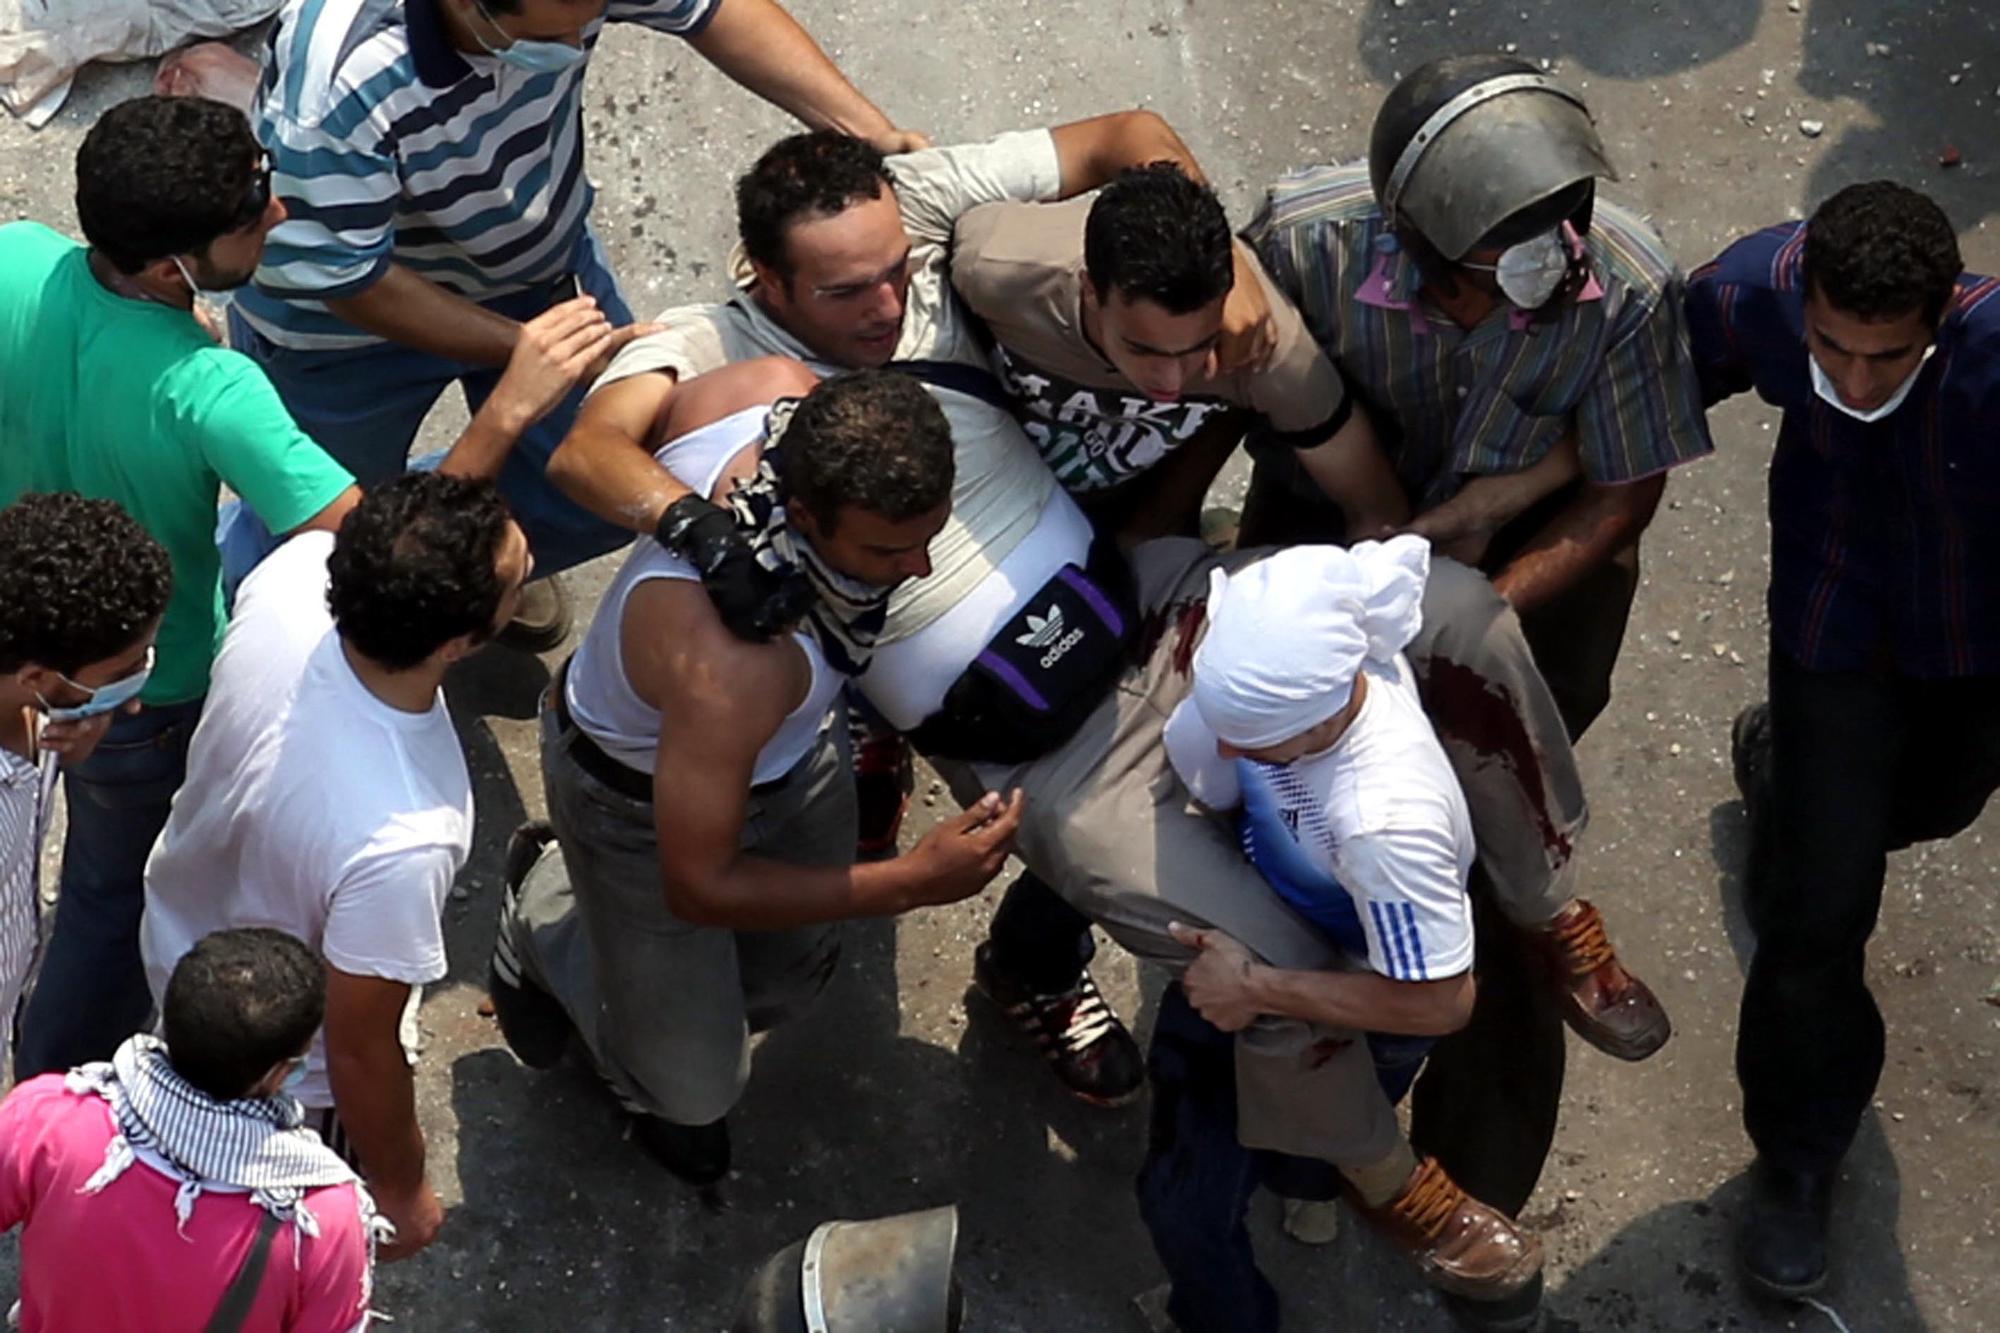 Egypte blessés Caire manifesation [Ahmed Ismail /Anadolu Agency - Ahmed Ismail]